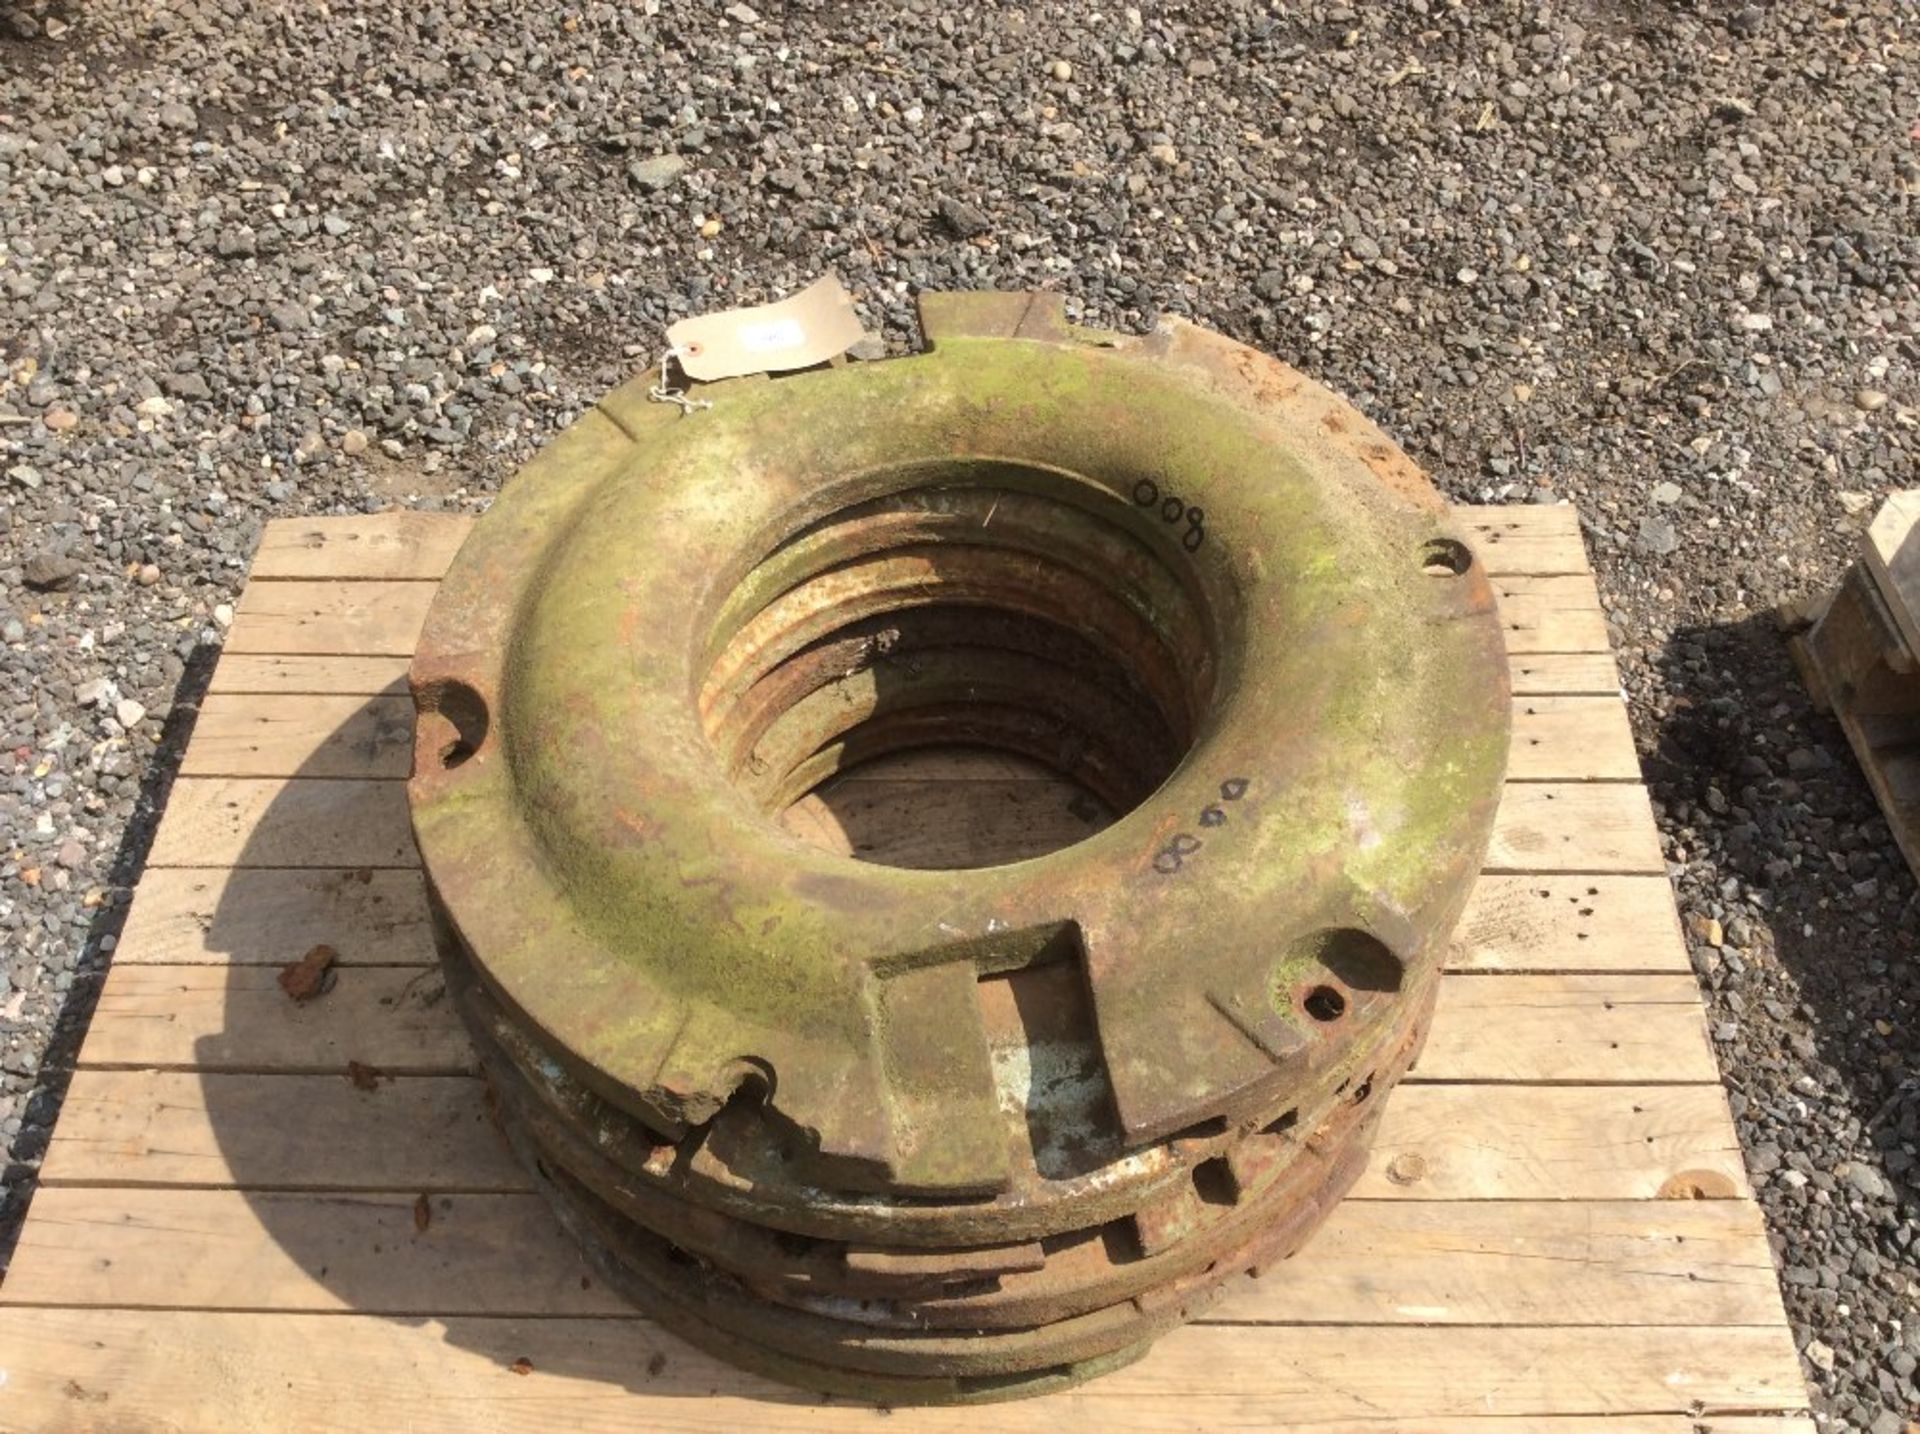 6x Ford wheel weights.